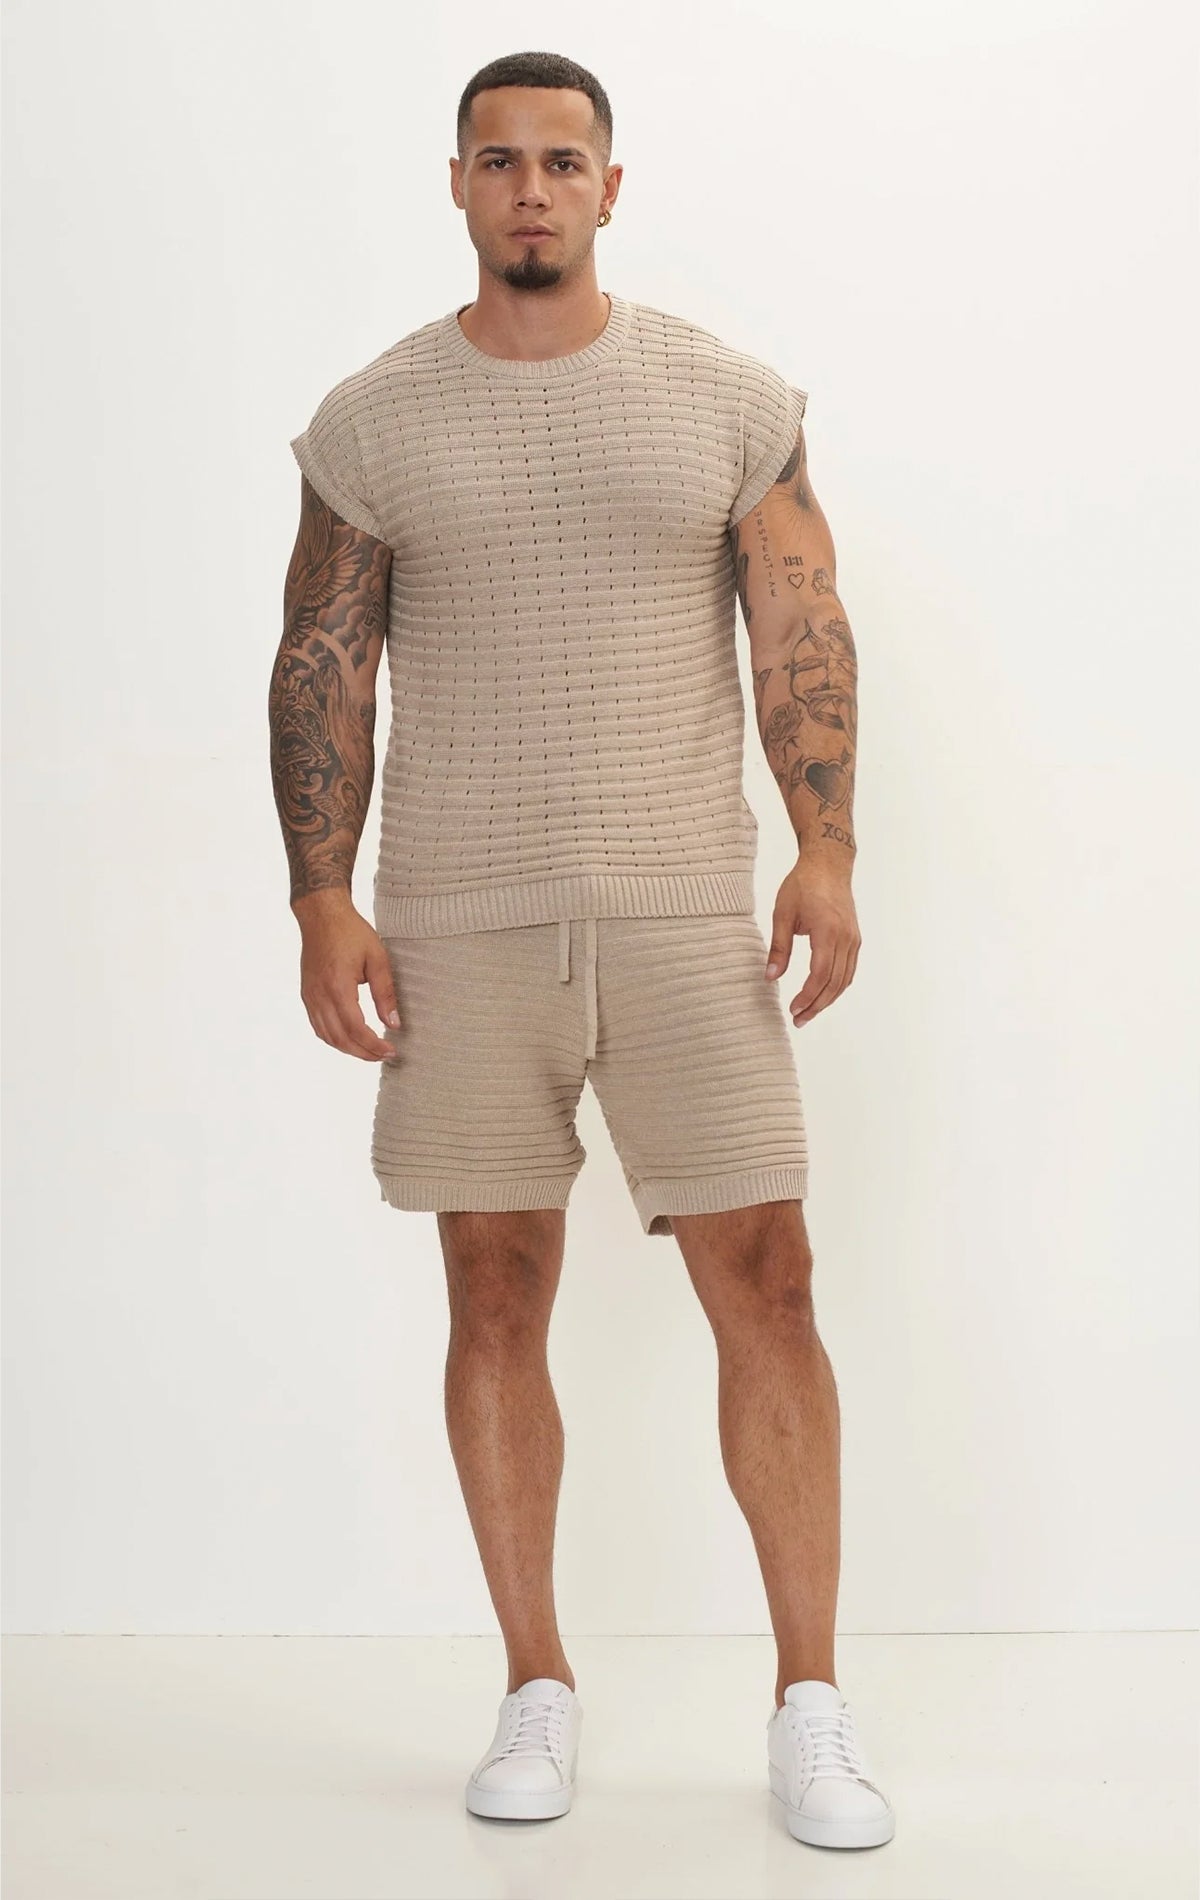 Men's stone eyelet short sleeve knit top and shorts set in a variety of colors. The set is made from a soft and breathable knit fabric (50% viscose, 50% polyamide) and features a relaxed-fit top with eyelet detailing on the short sleeves and comfortable shorts with an elastic waistband.